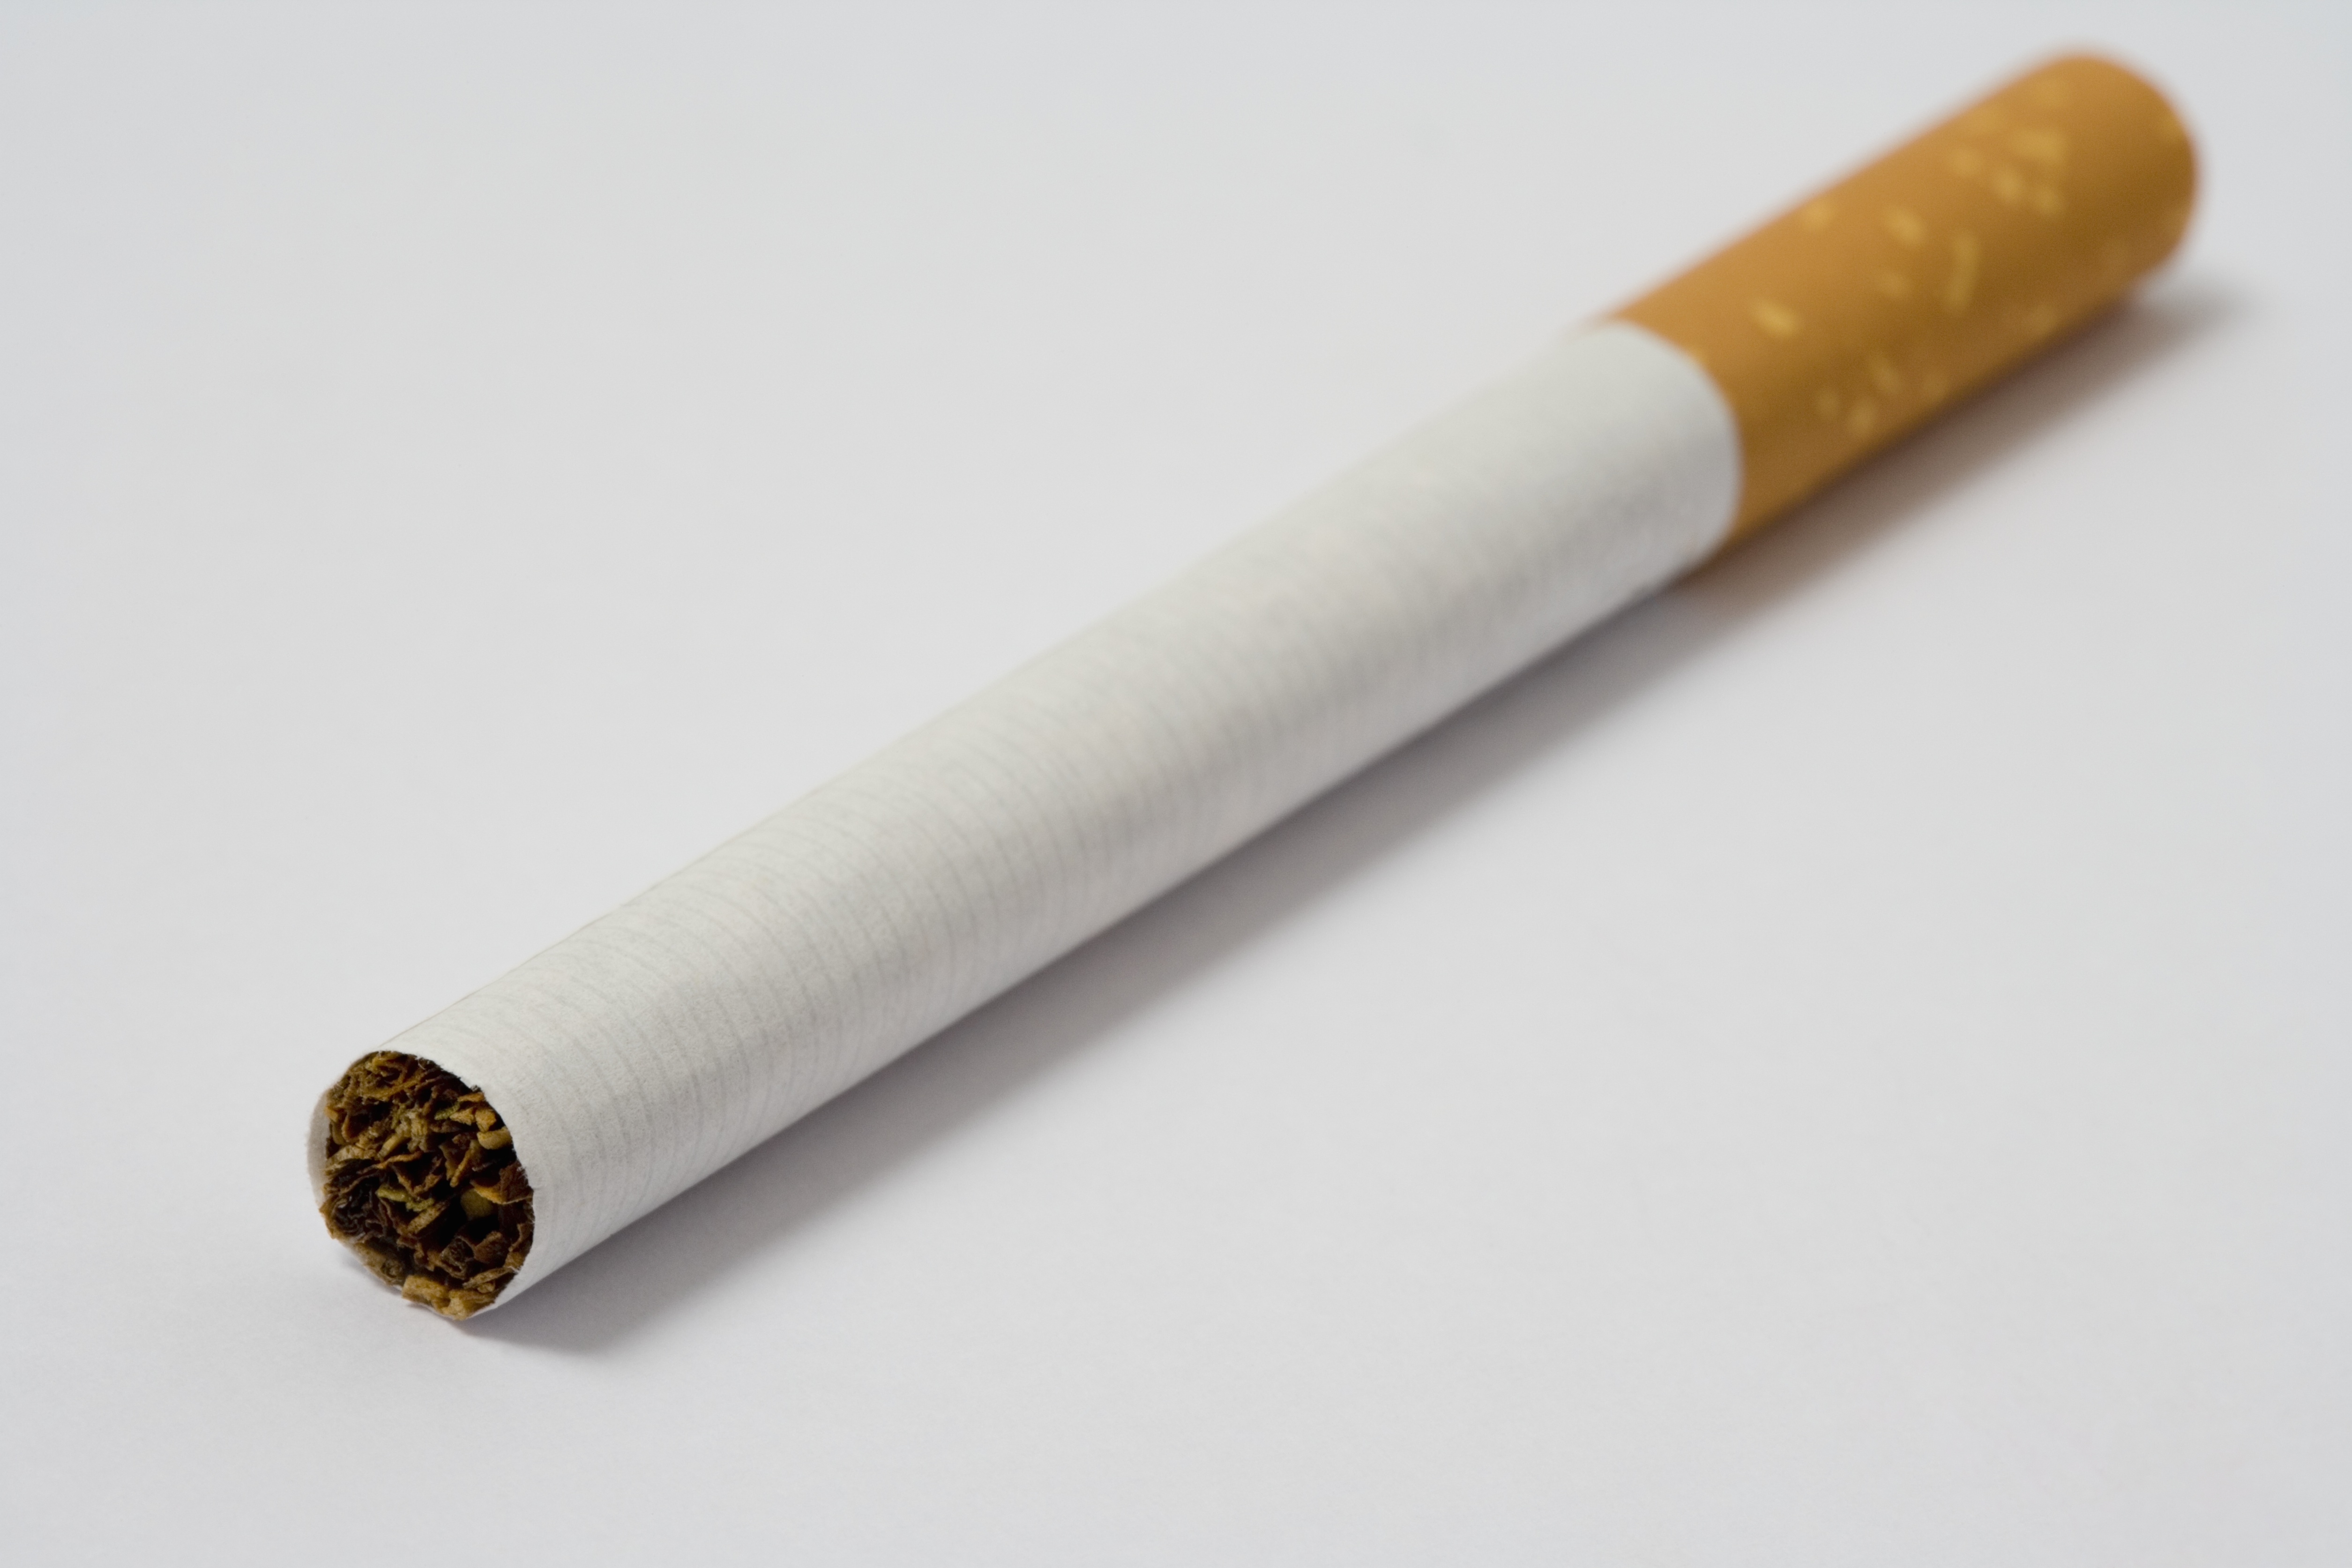 It’s been widely reported that smokers got a bit of a break